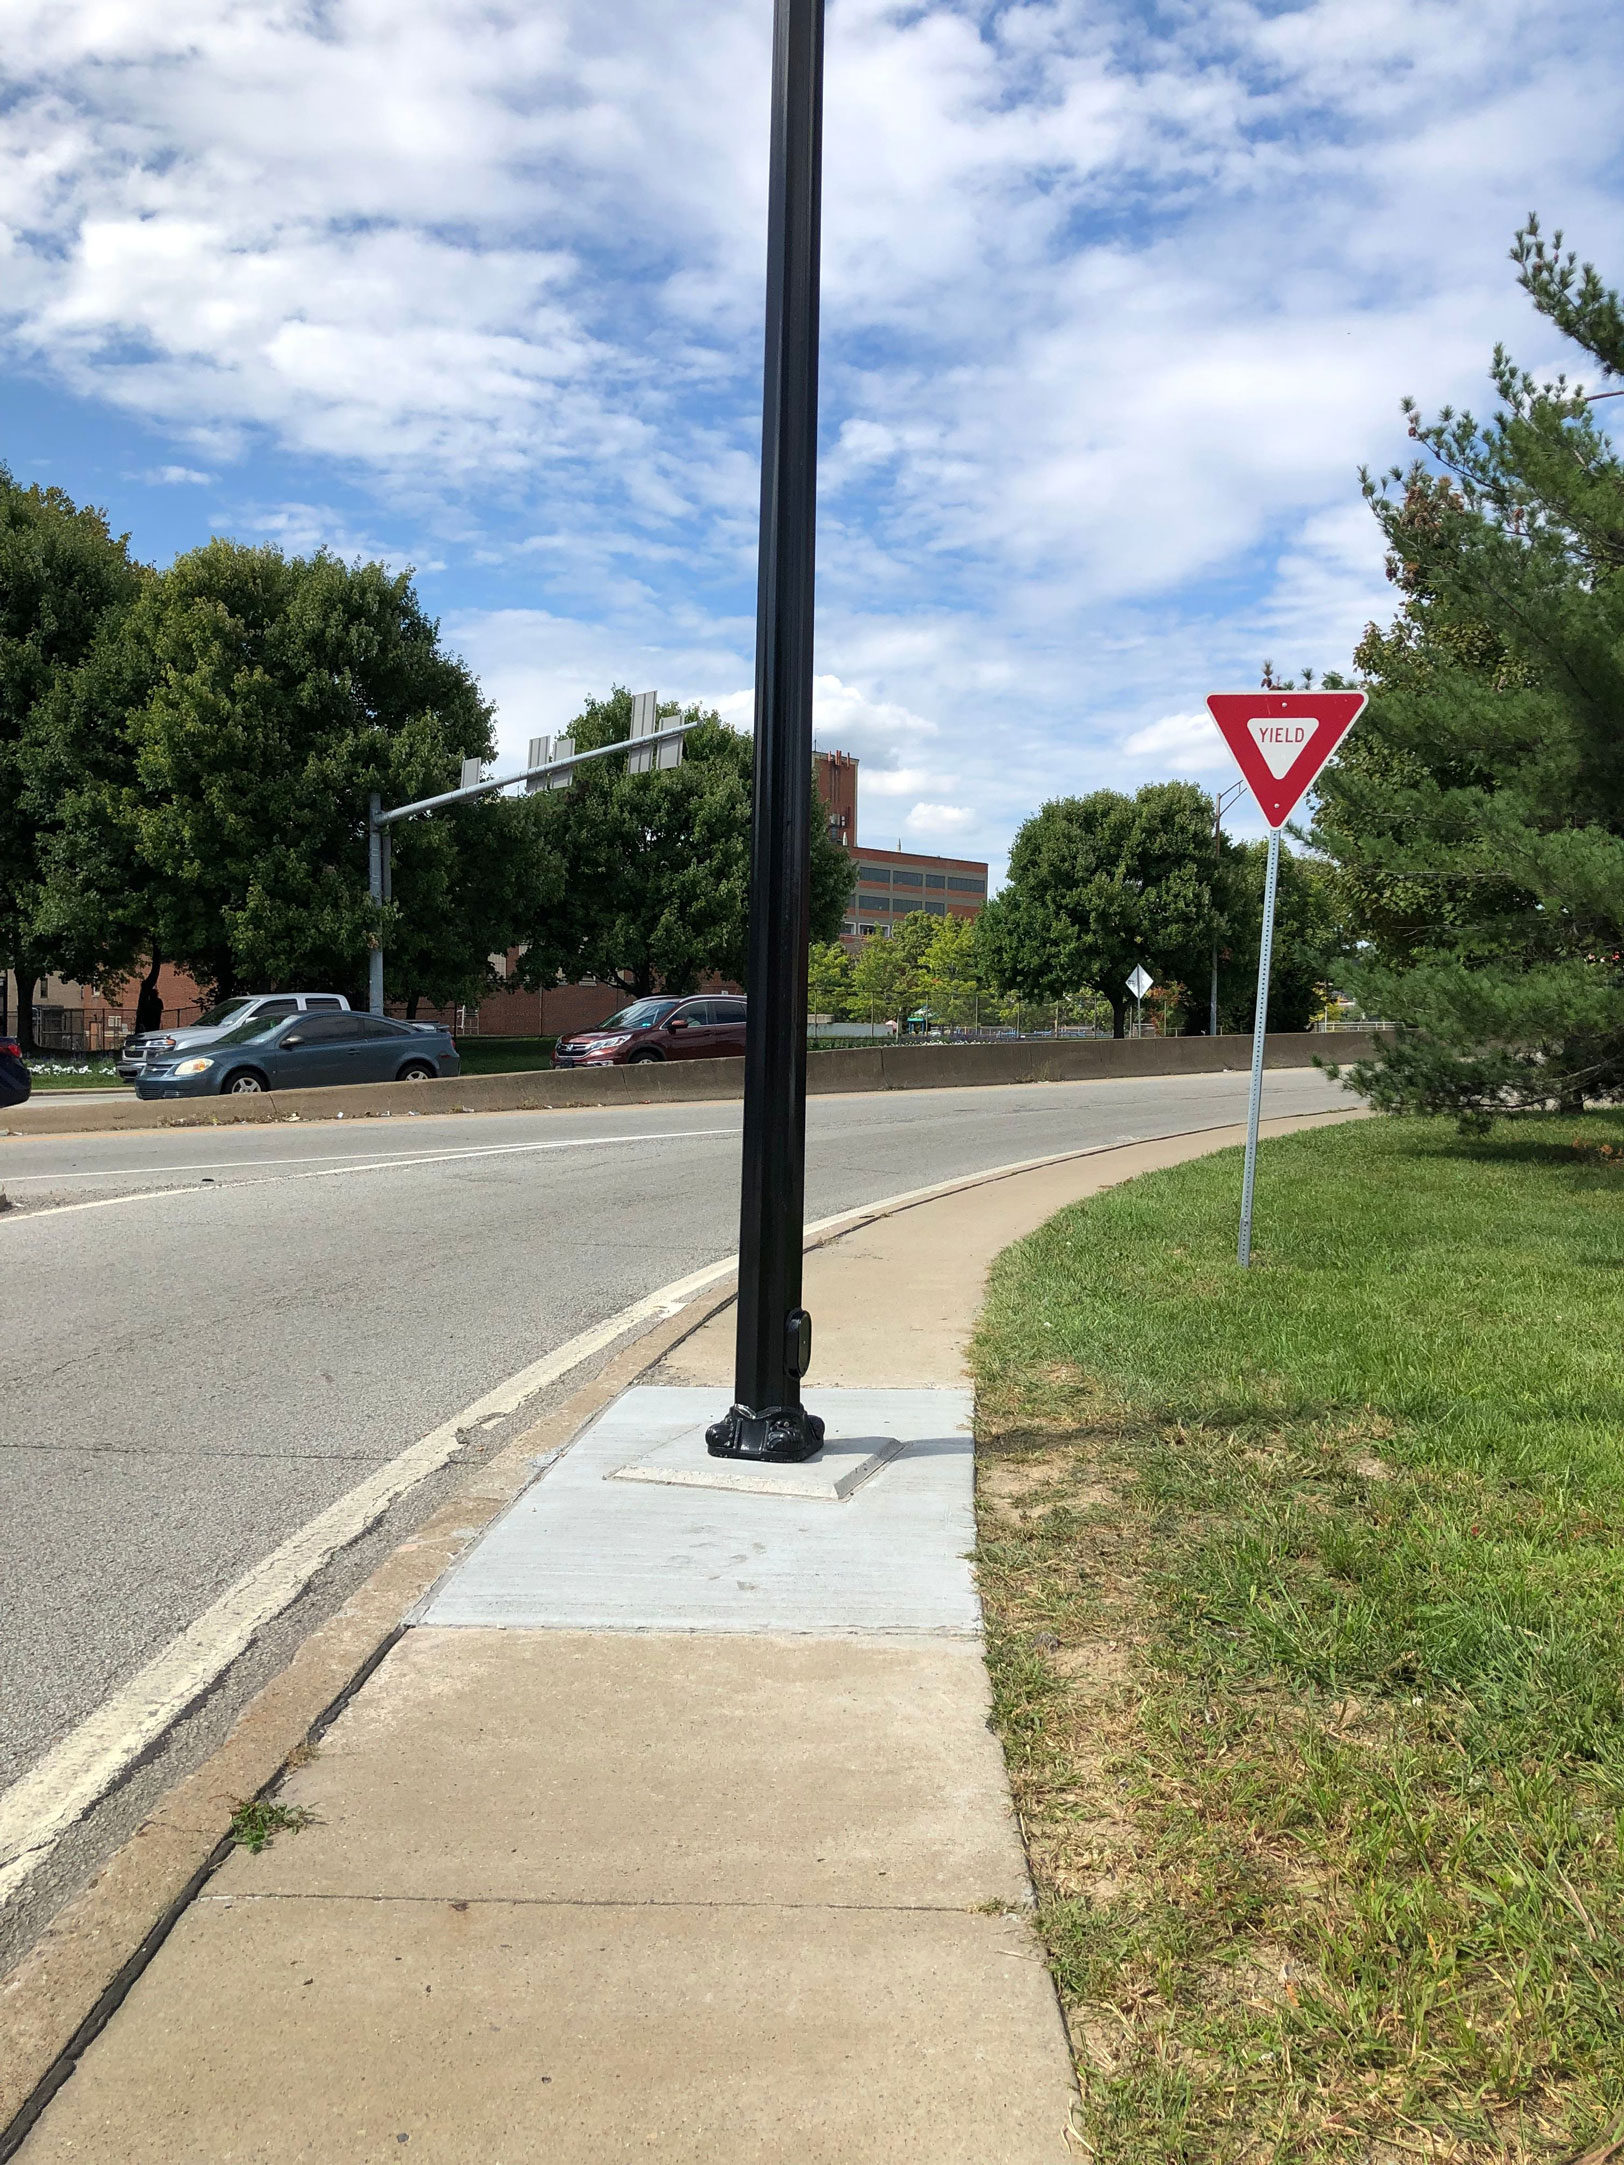 Photograph of a sidewalk. There’s a lamppost in the middle of the sidewalk, making it impossible for a wheelchair user to get past without going into the road or on the grass.